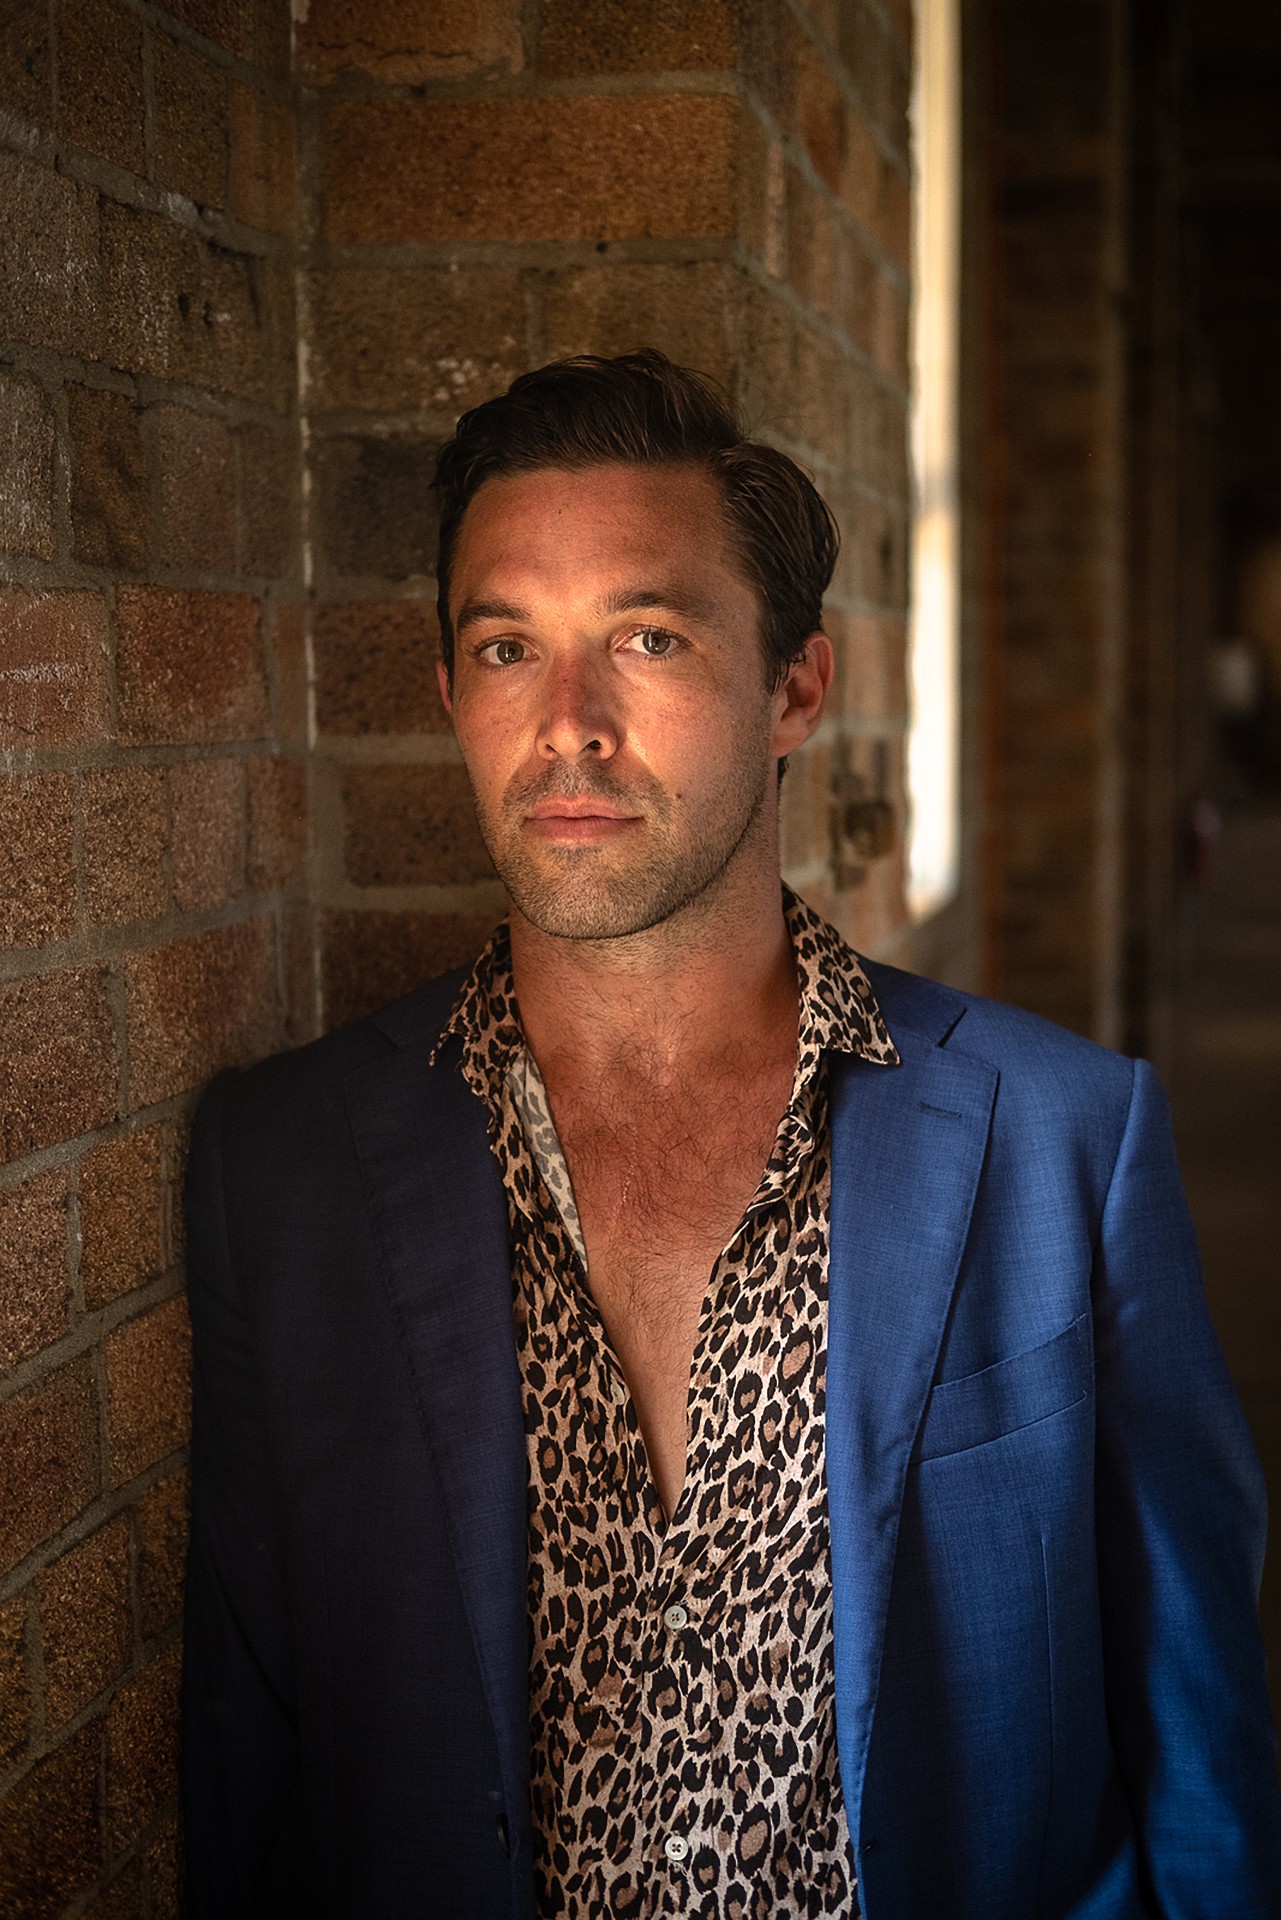 A 30-something Aboriginal man stands in front of a brick wall. He is wearing a blue blazer and leopard print button-up shirt.